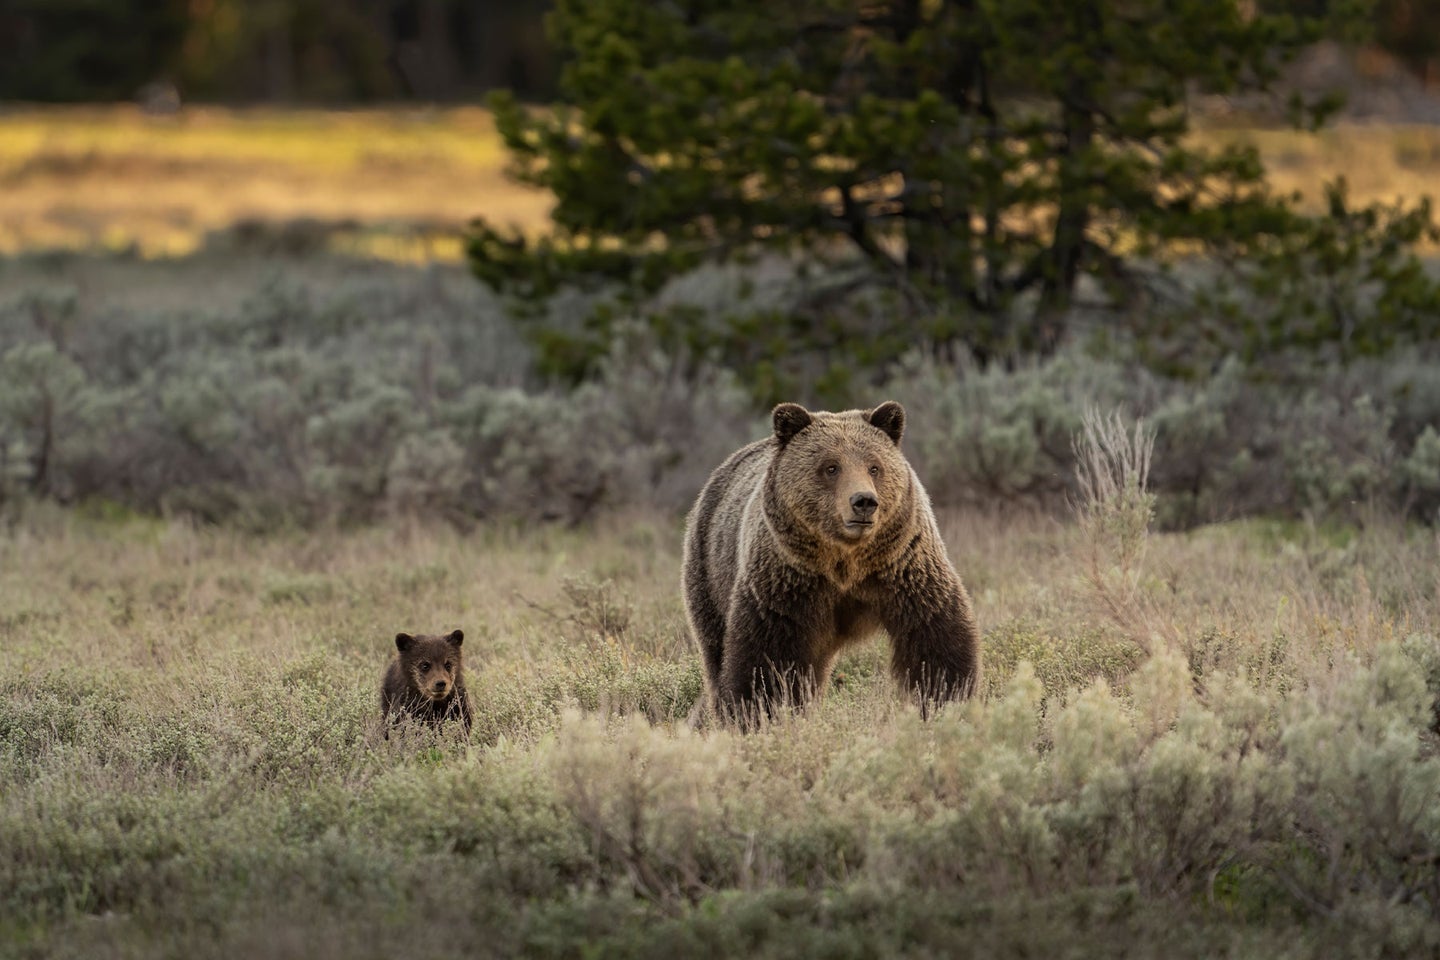 A grizzly sow with a young-of-the-year cub.